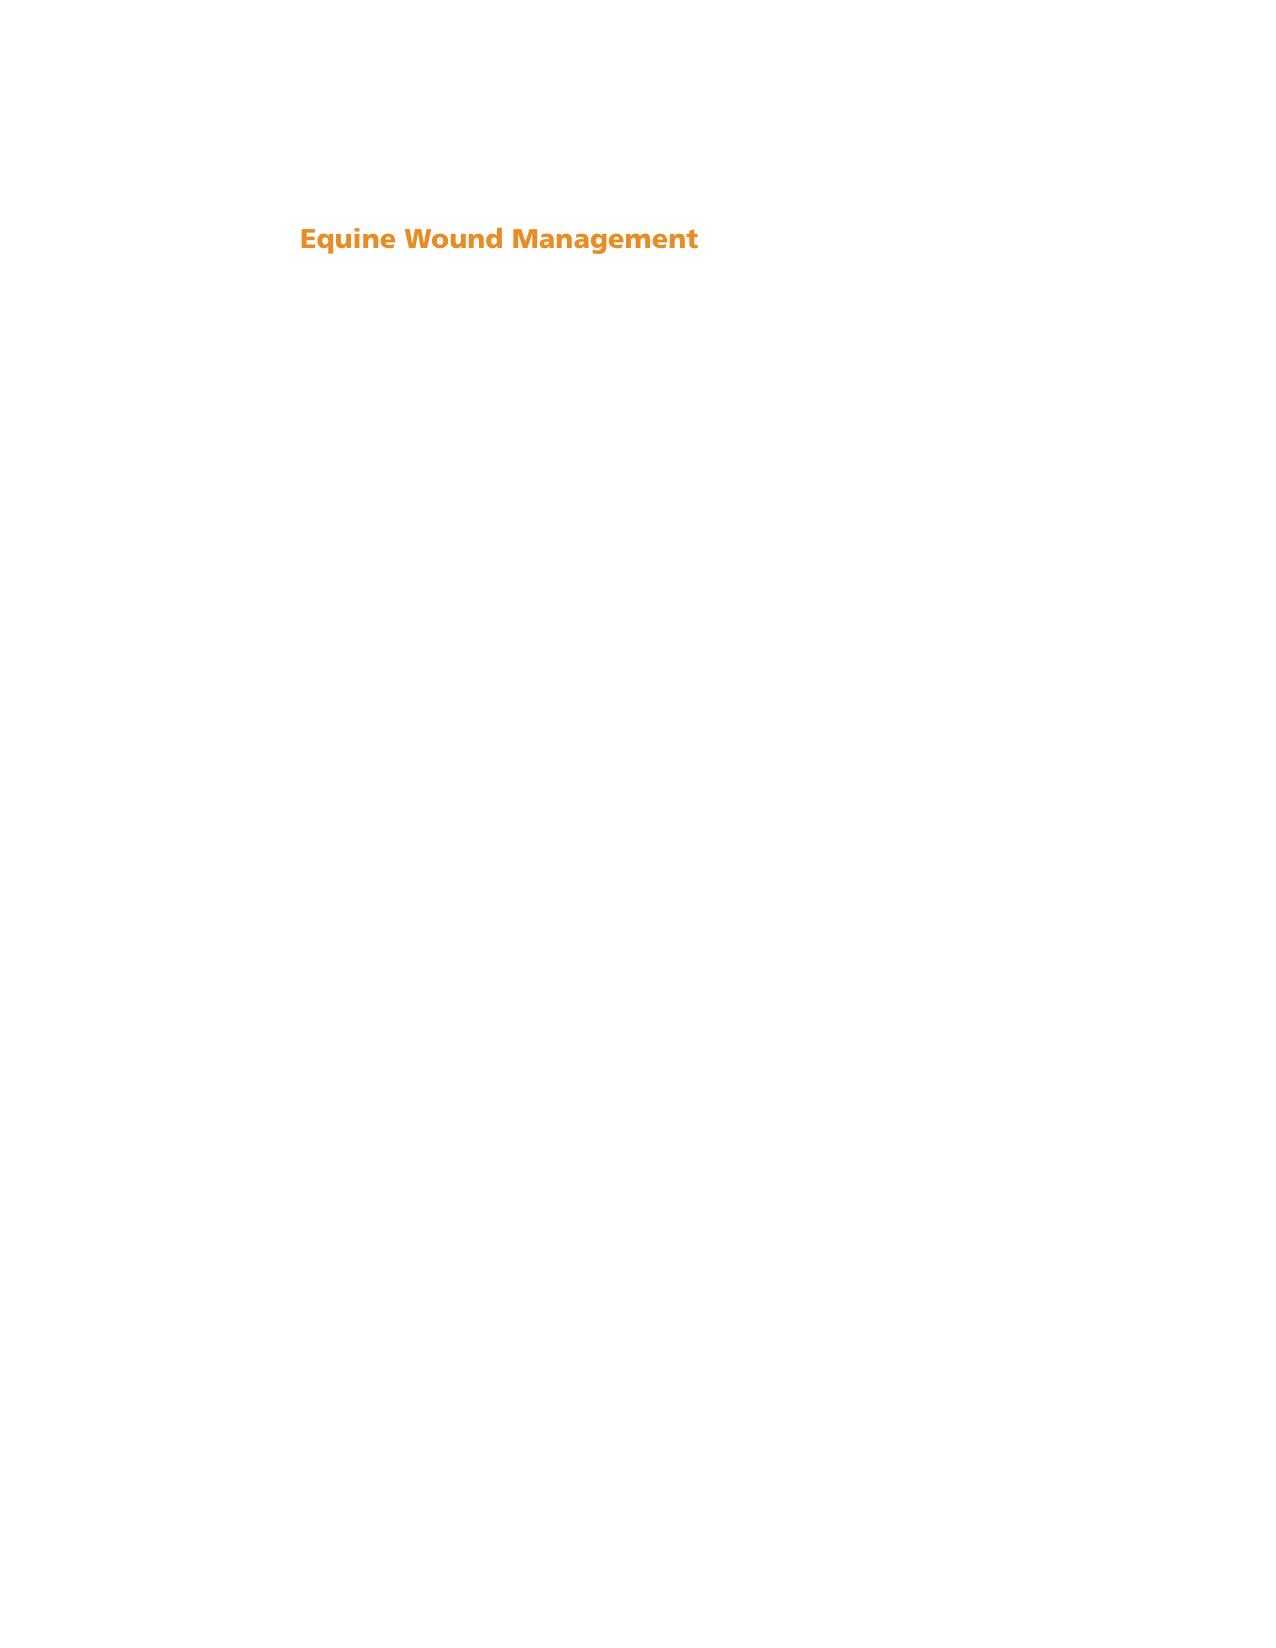 Equine Wound Management 3rd Edition 2017